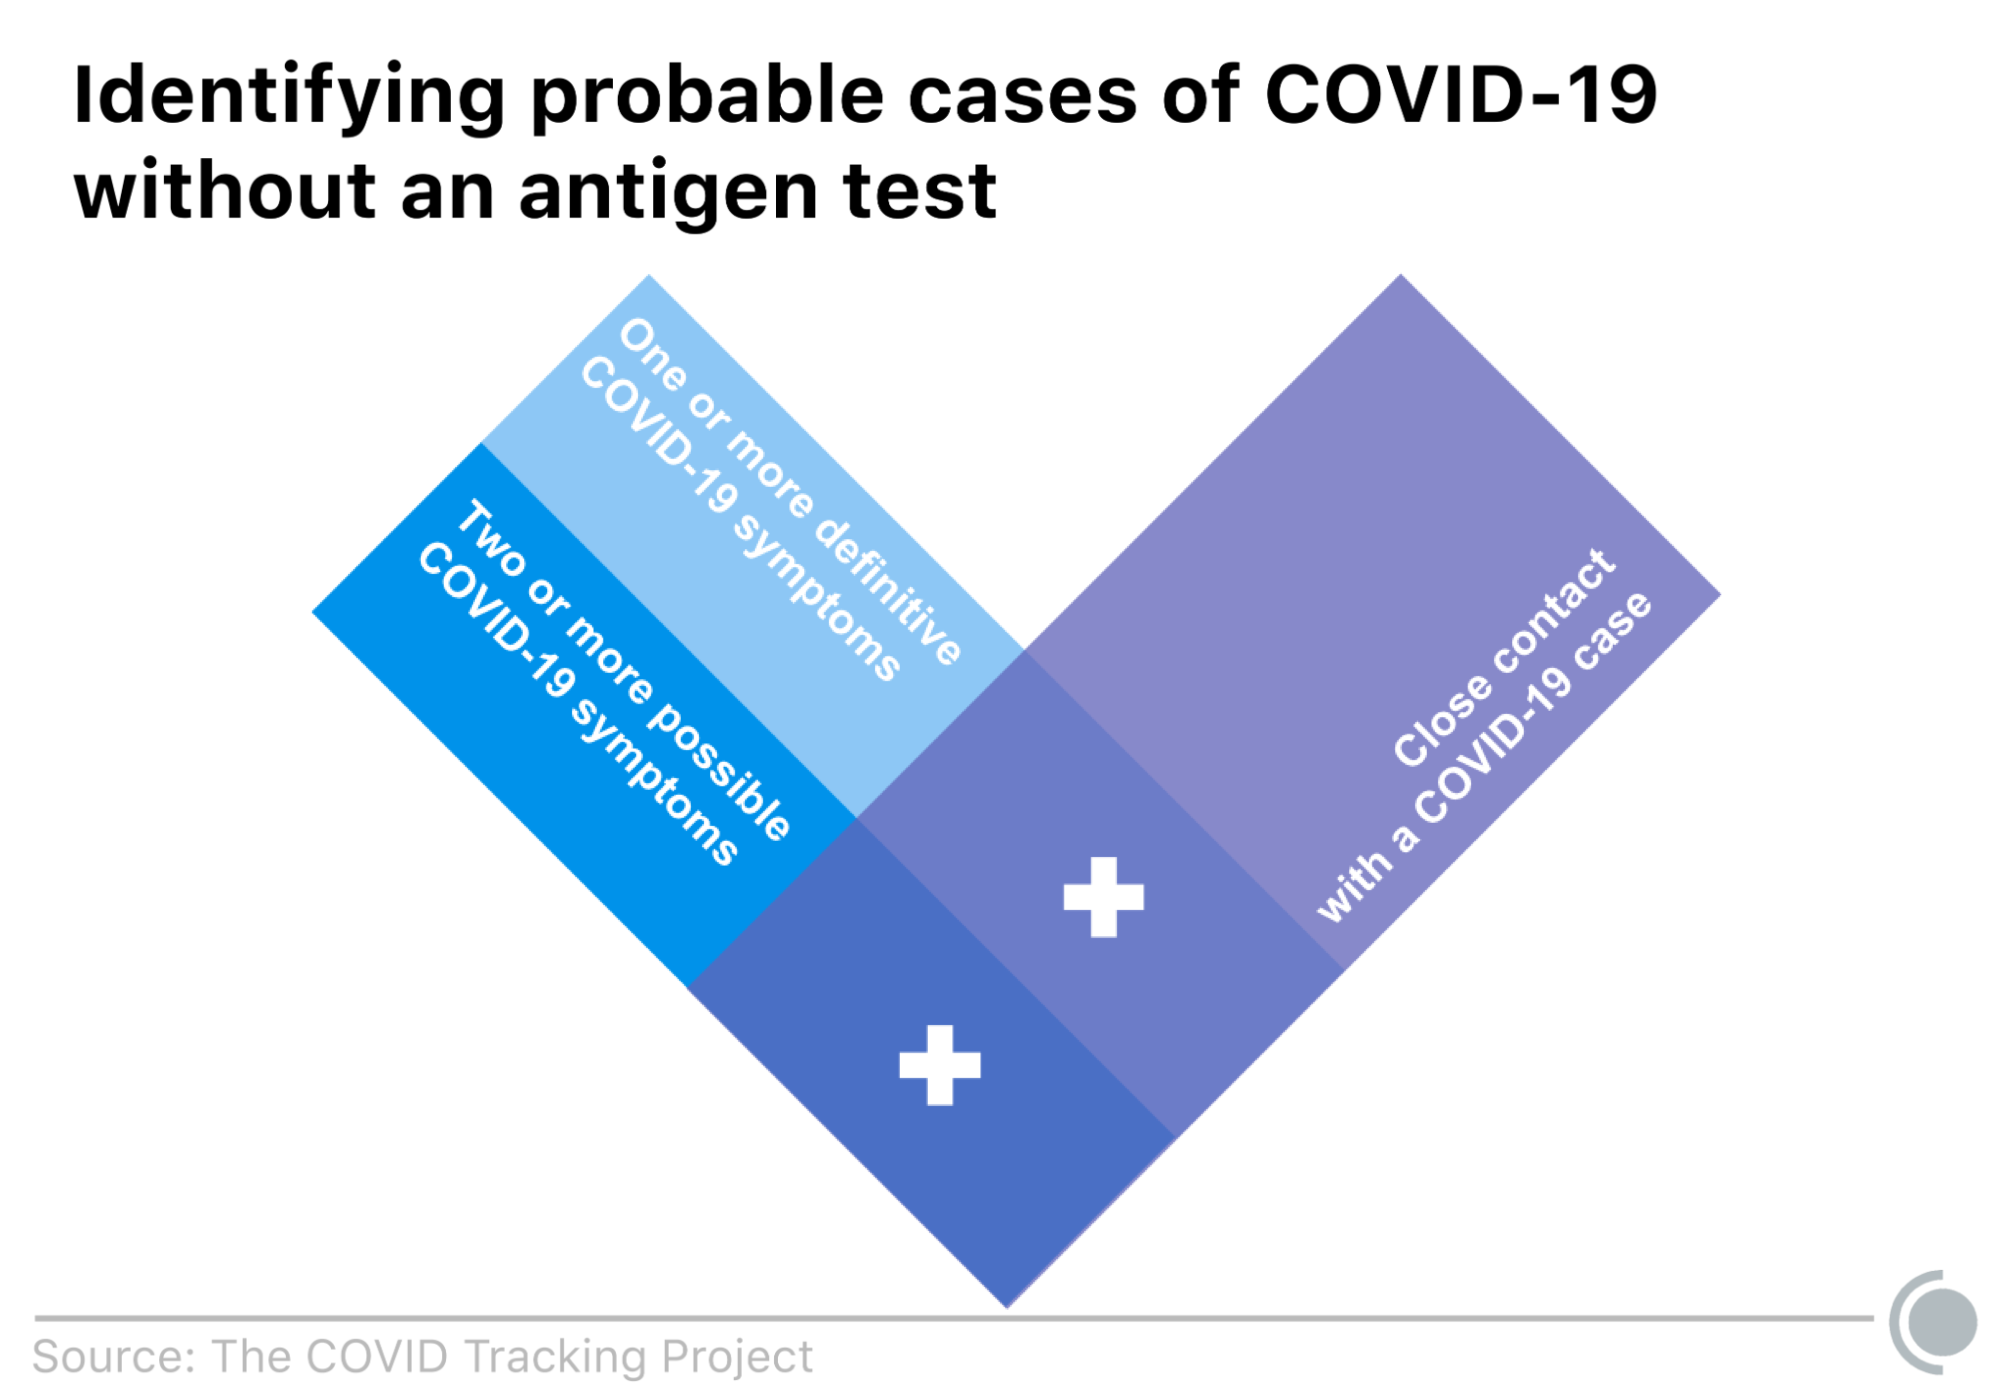 A venn diagram illustrates the combination of criteria that are necessary to identify a probable case of COVID-19 without a positive antigen test. Individuals must have had both recent close contact with a COVID-19 case, and either one definitive COVID-19 symptom or at least two possible COVID-19 symptoms.